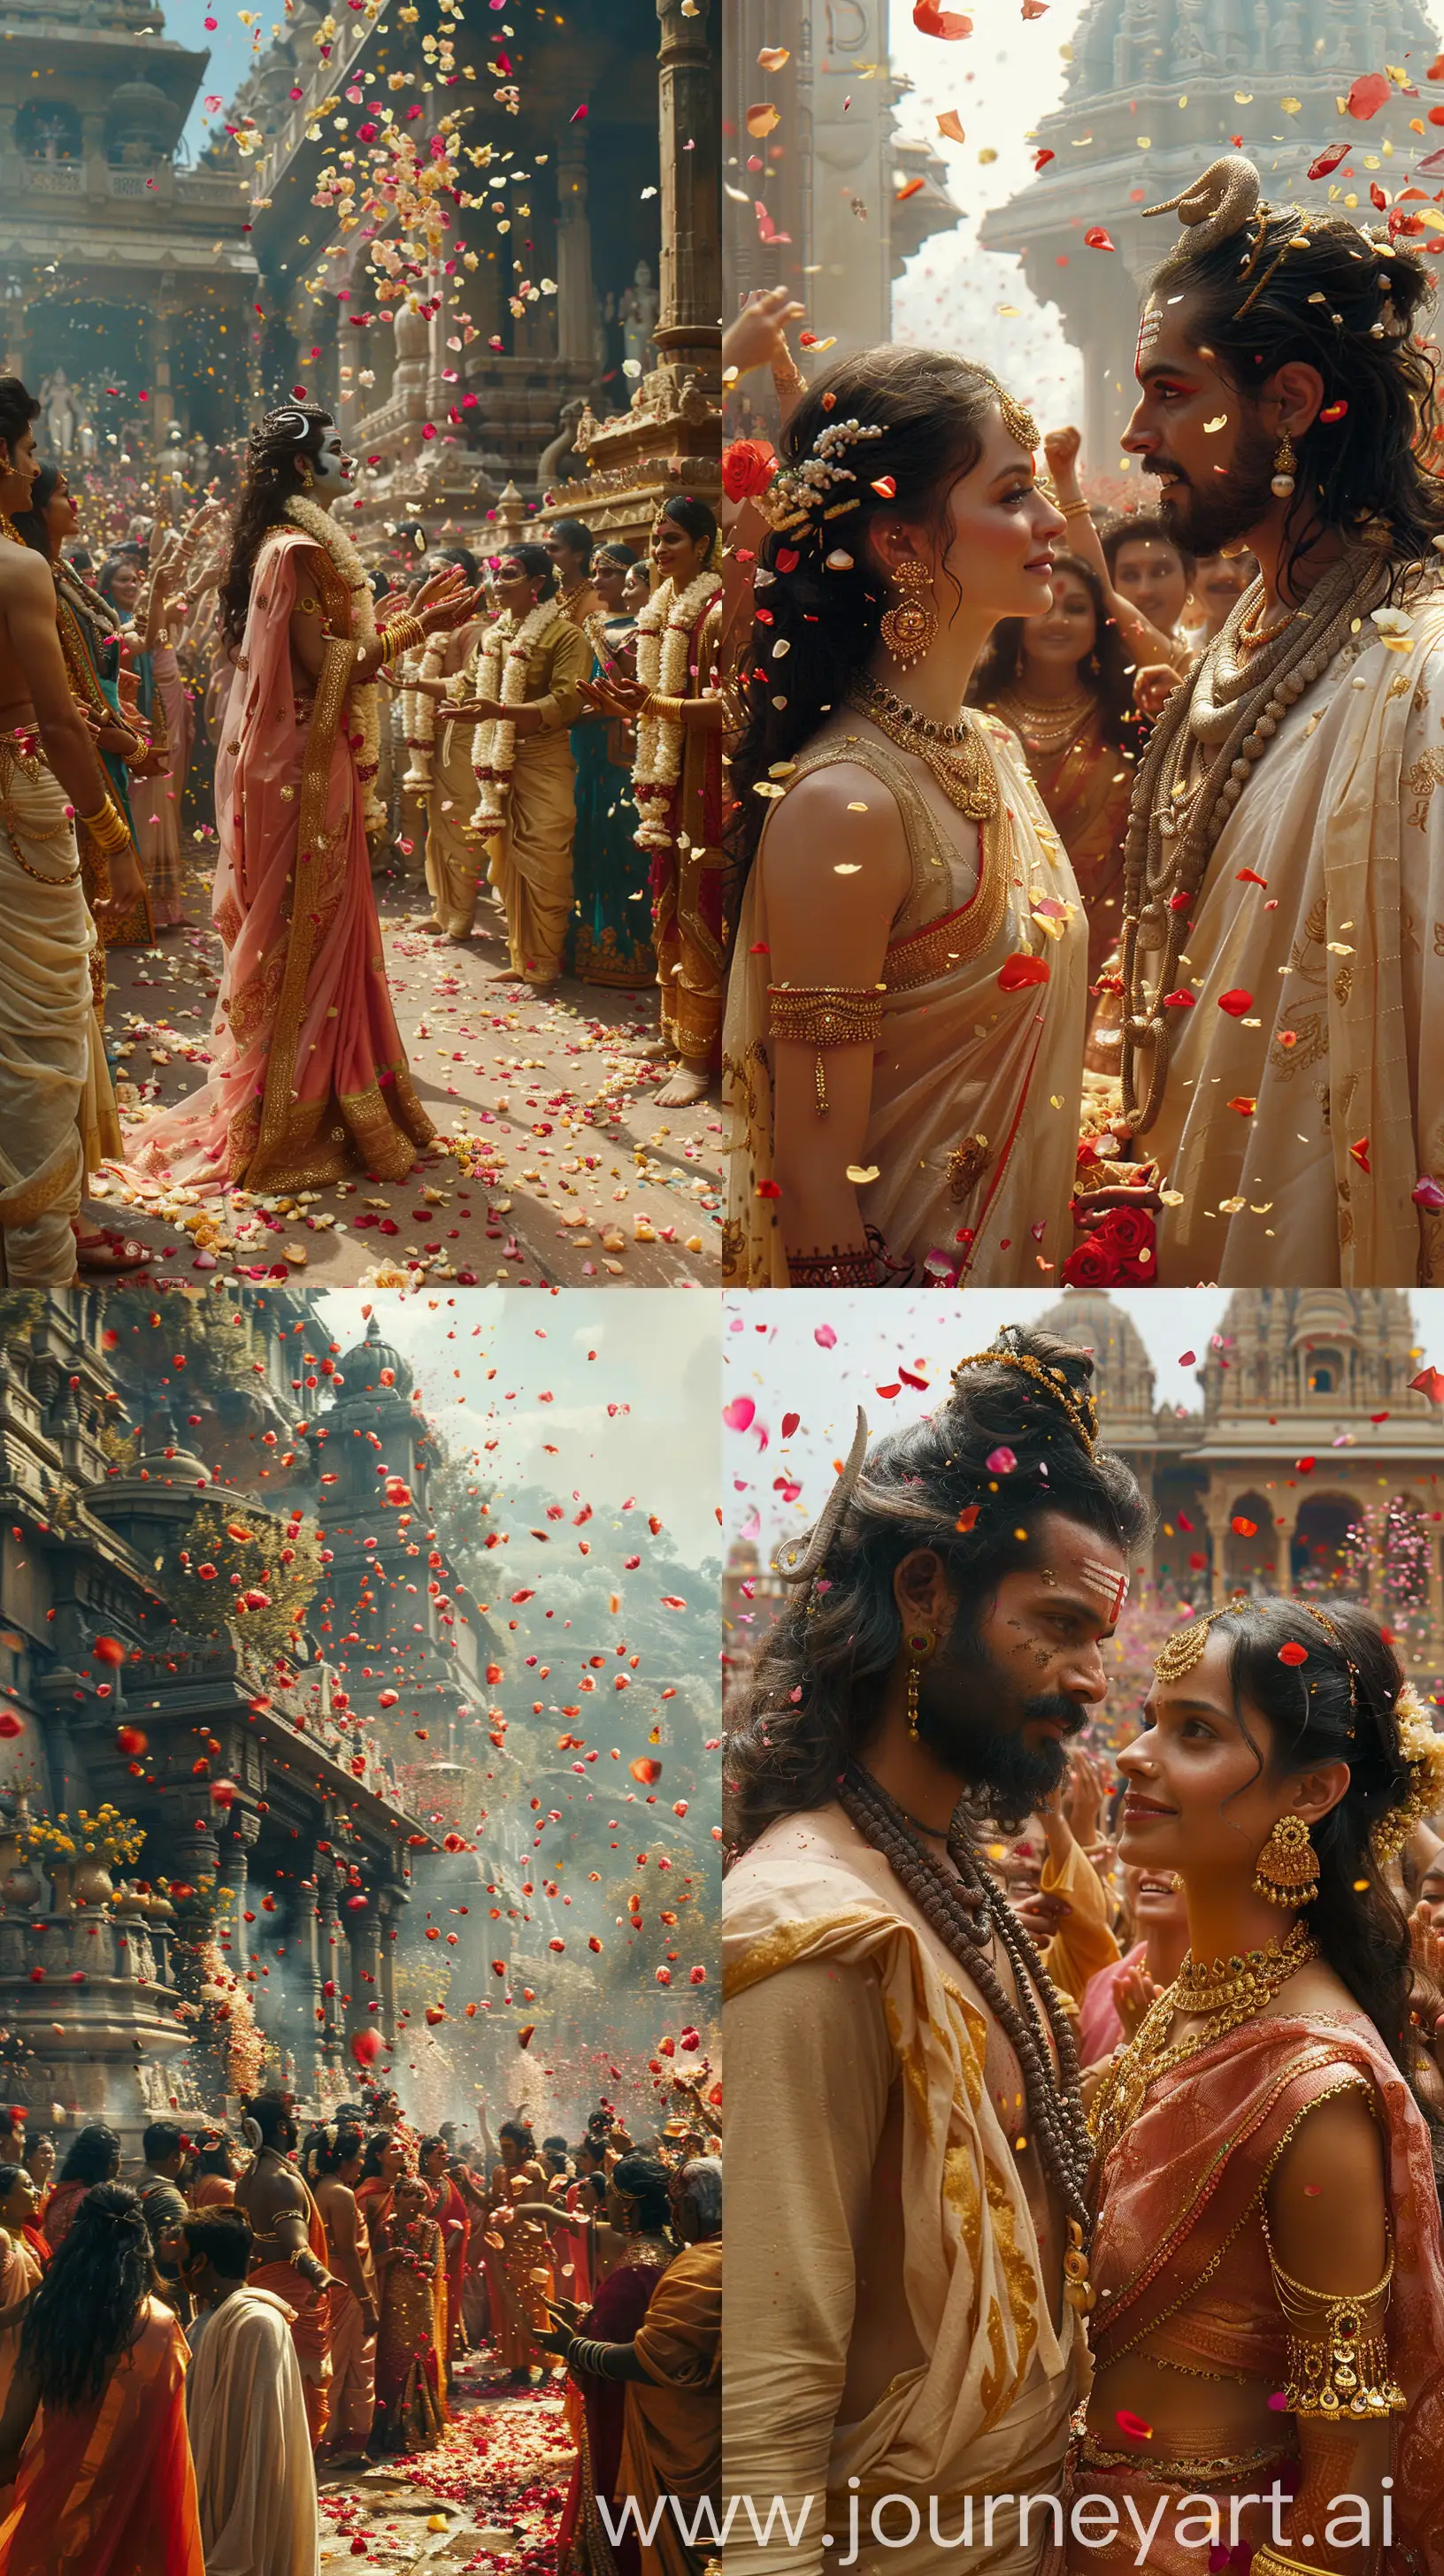 High detail IMAX HD image of Lavish wedding ceremony of Hindu gods Lord Shiva and Goddess Parvati, celebrated during Maha Shivaratri, crowds of devotees tossing myriad rose petals and fragrant flowers from above, auspicious, vivid colors, intricate traditional Indian attire, ornate gold jewelry, grand temple backdrop, ancient mythological essence captured in a grandiose Rajasthani miniature painting style, detailed festive atmosphere, photojournalistic --aspect 9:16 --stylize 750 --chaos 15 --v 6